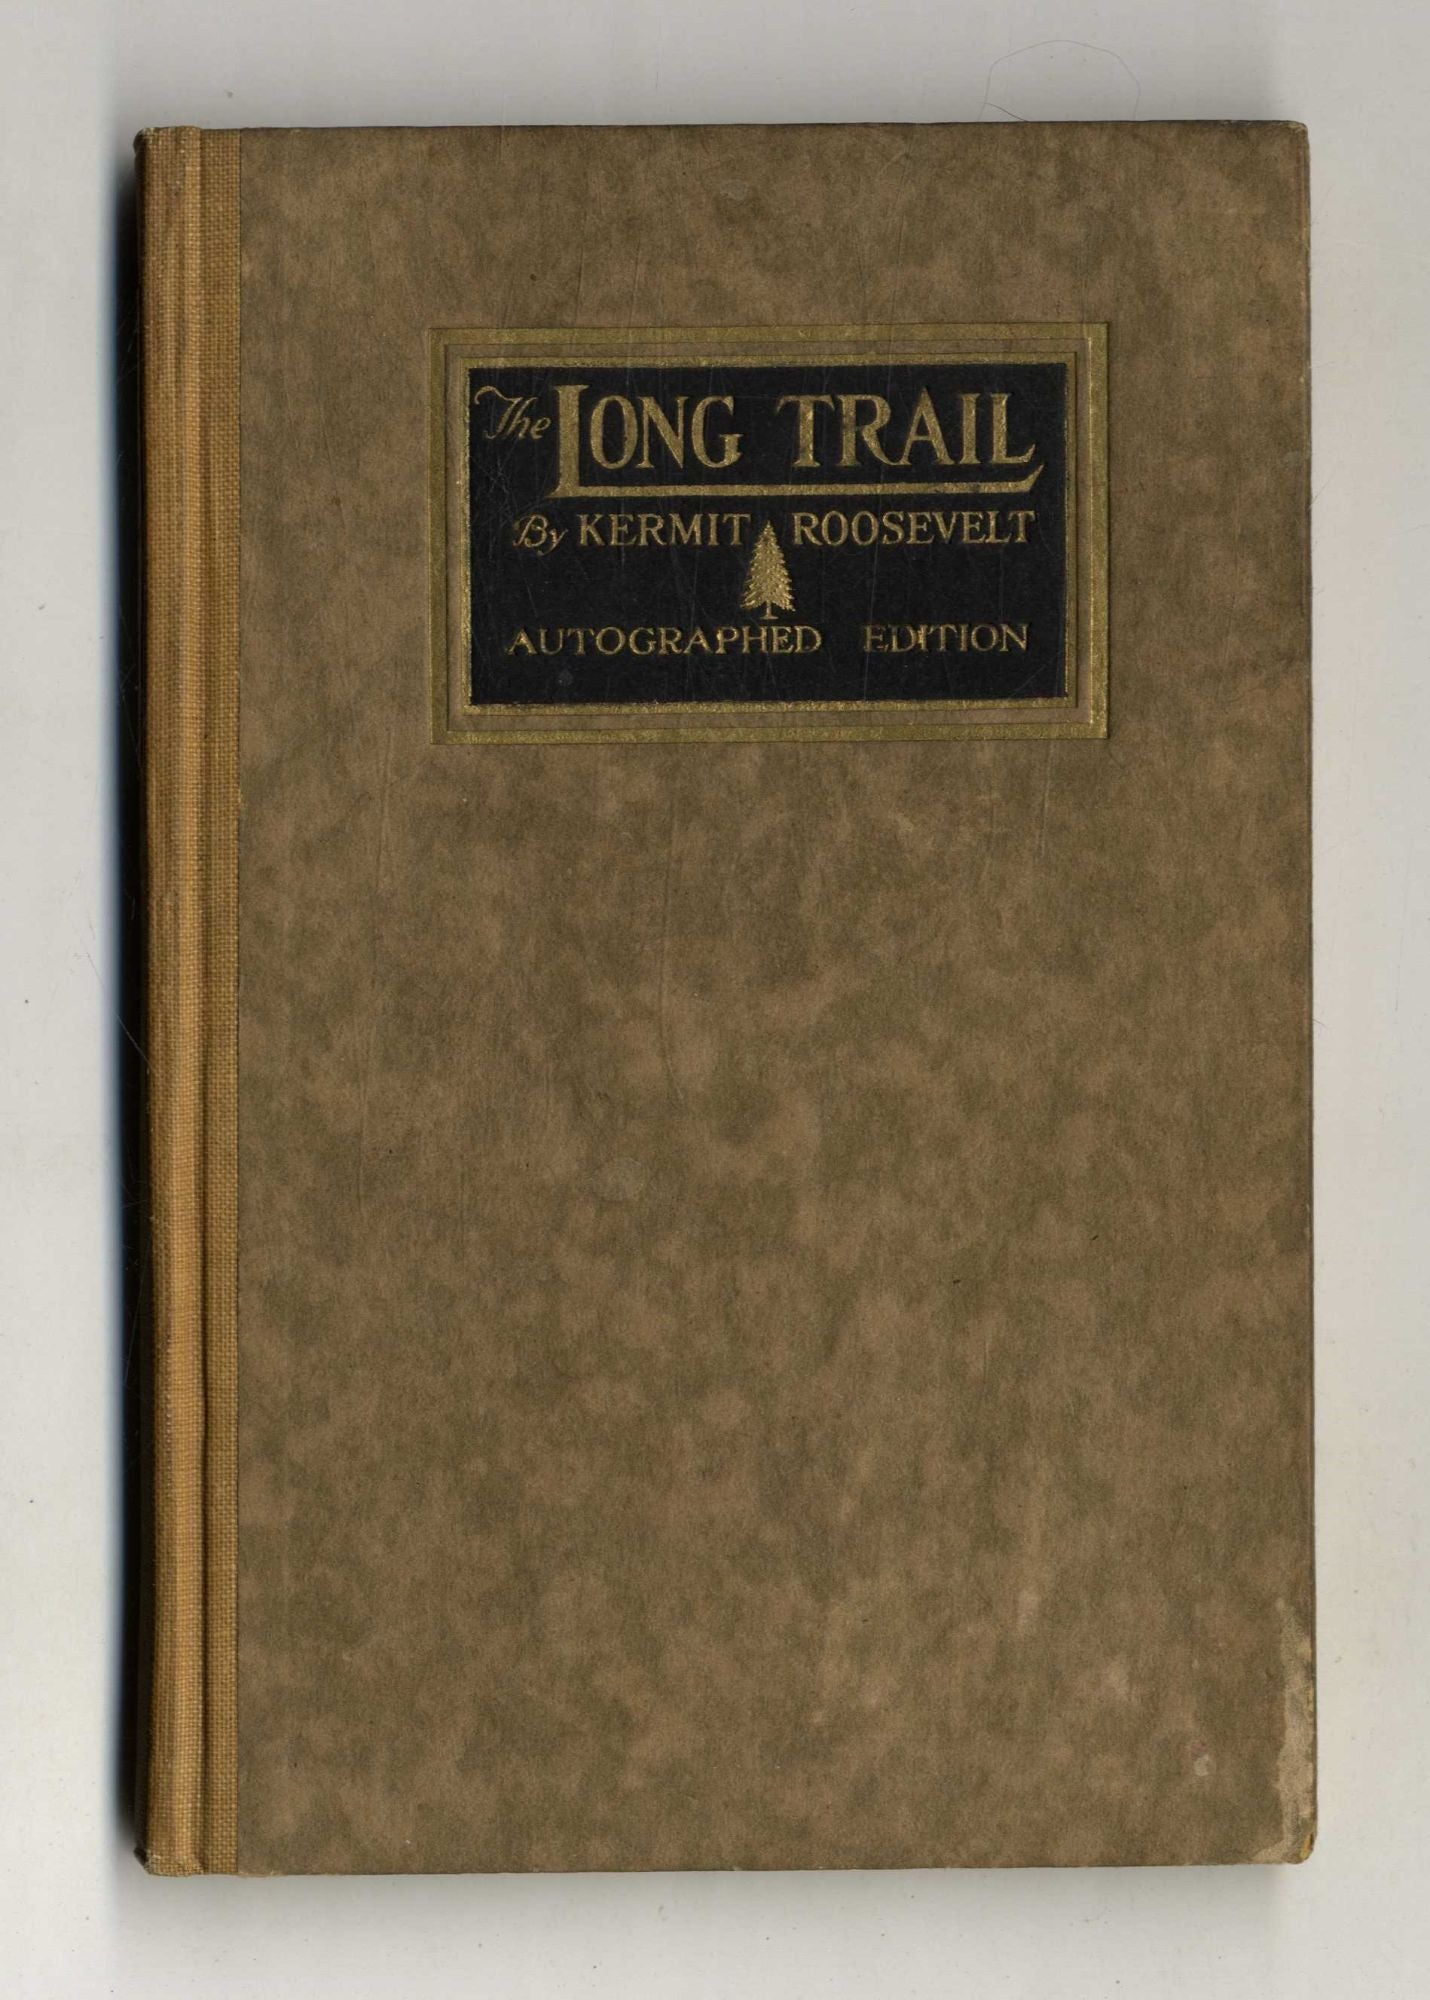 Book #28148 The Long Trail. Kermit Roosevelt.